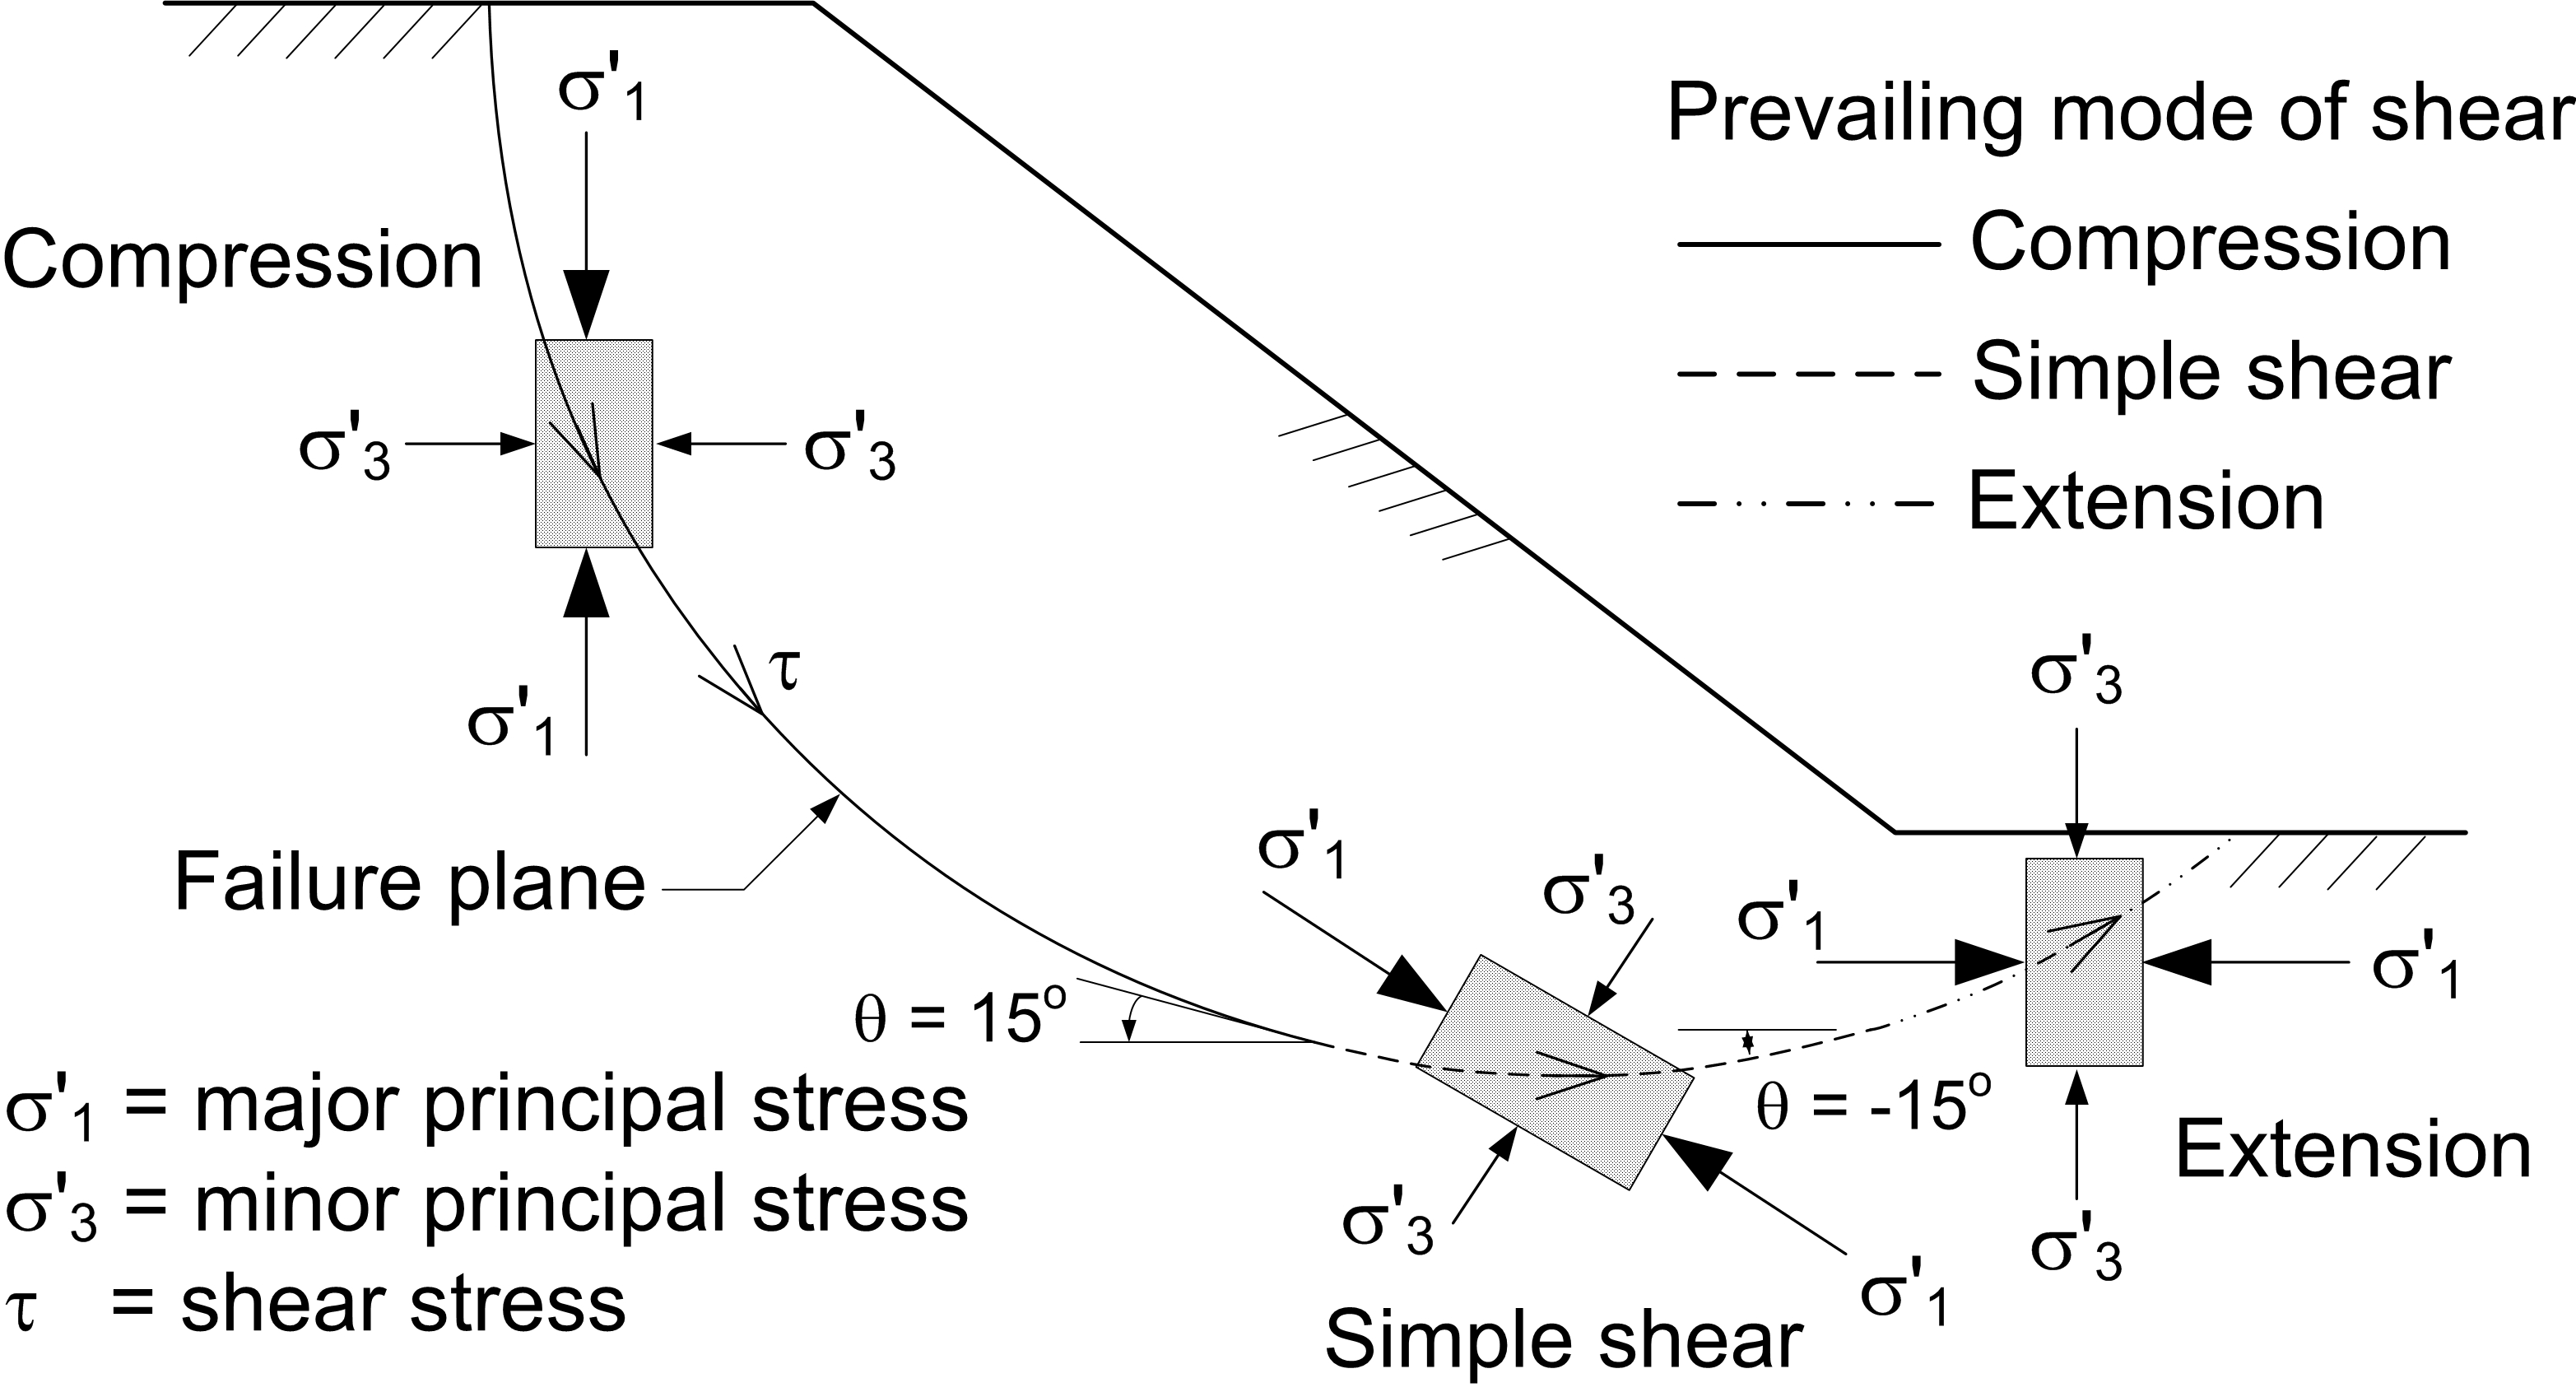 Variations of principal stress directions and magnitudes beneath a slope